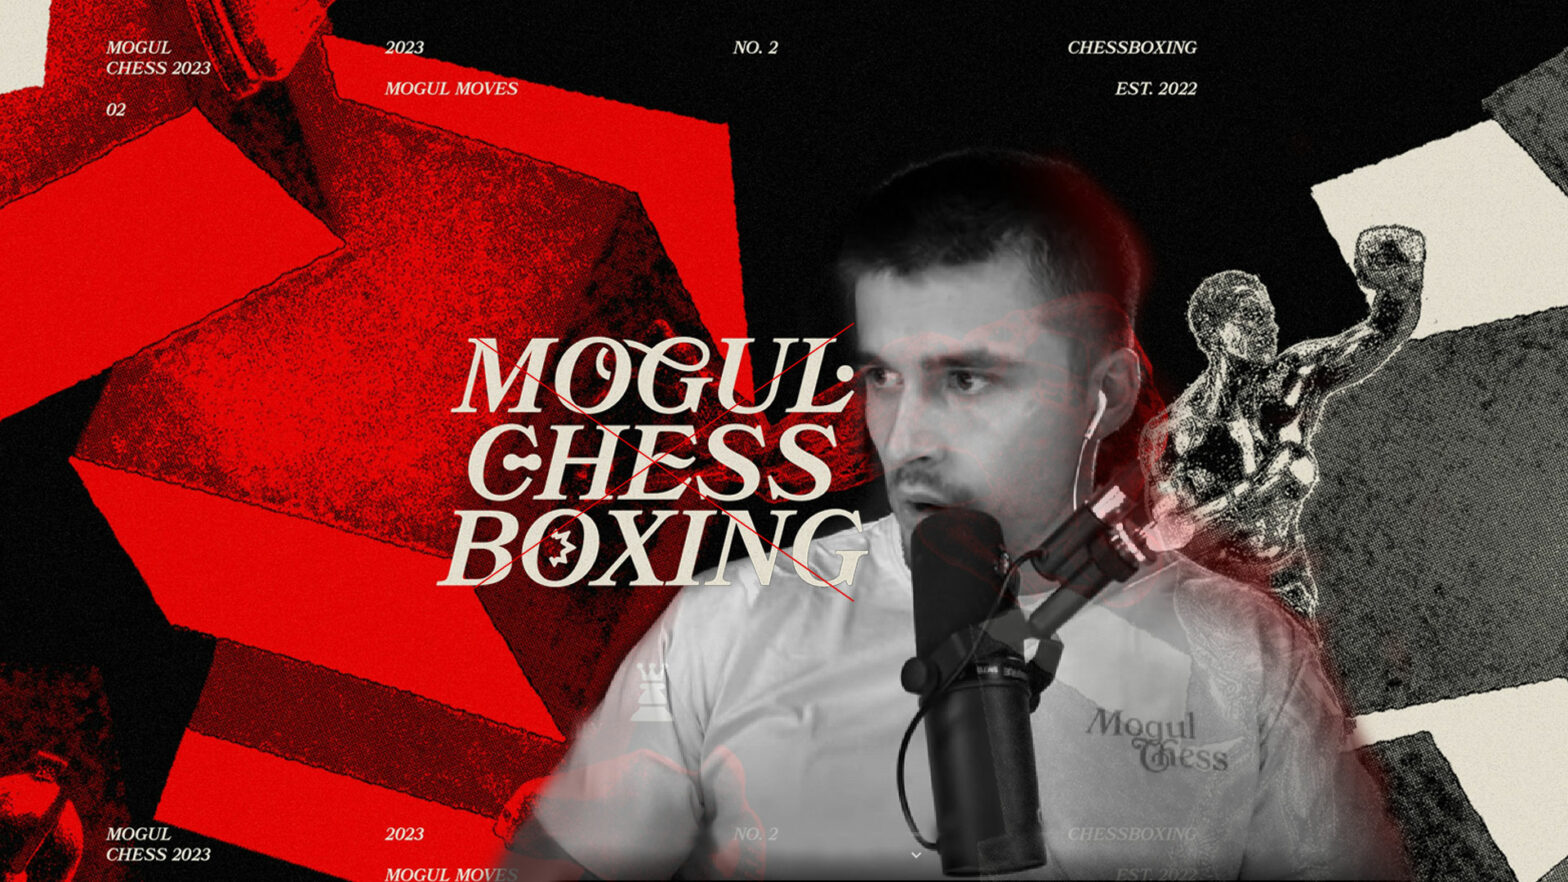 Ludwig brings Chessboxing to the world of content creation with the